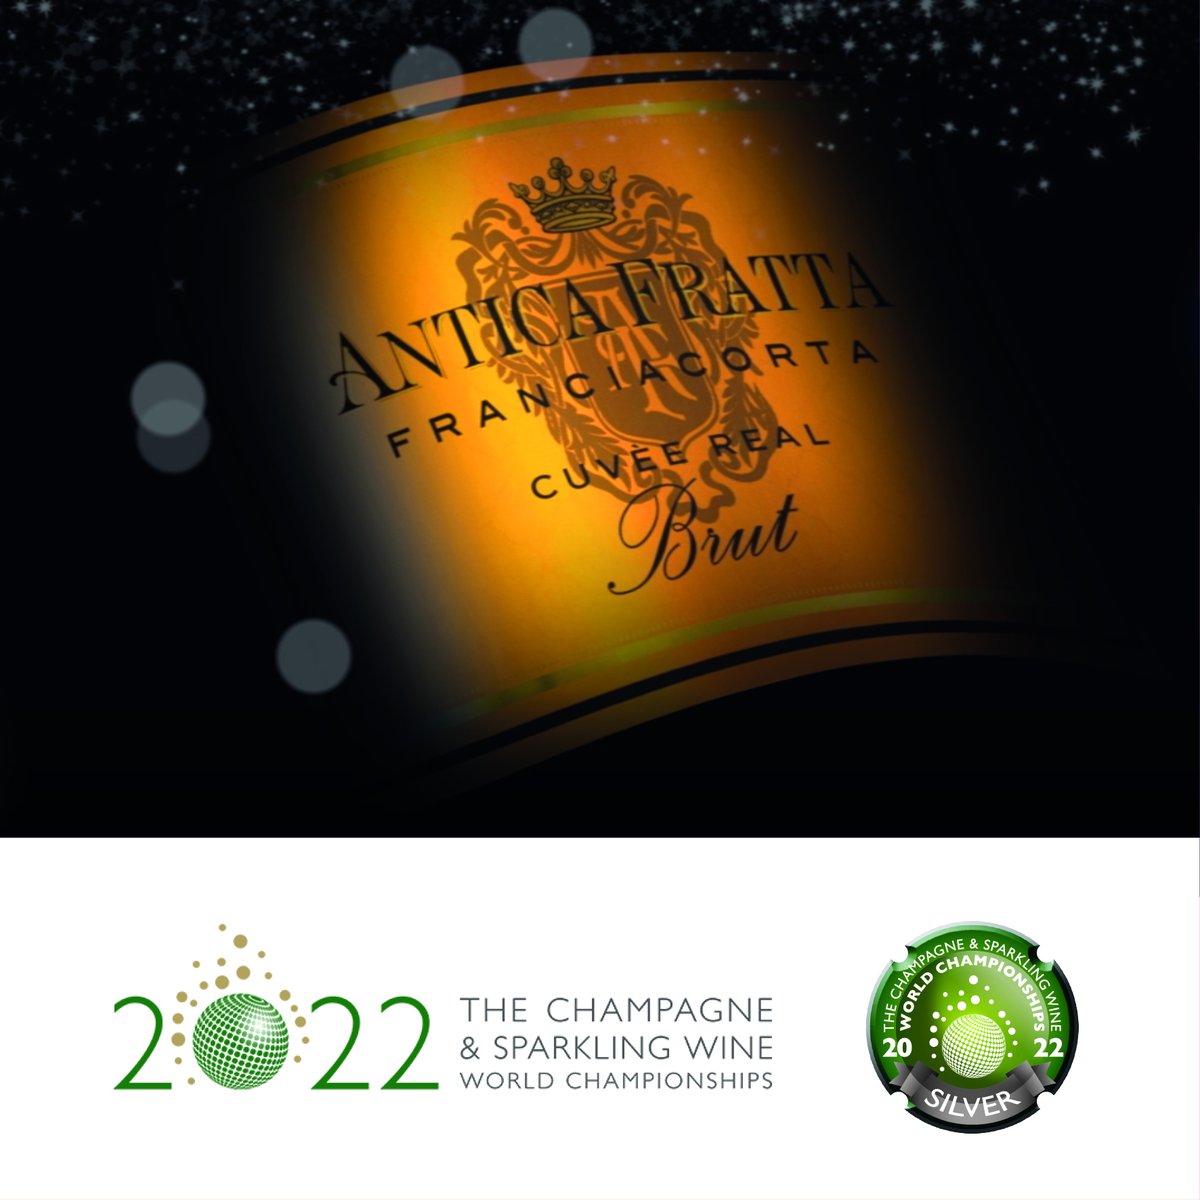 Sharing with pride and honor such achievement! Thank you to the Champagne & Sparkling Wine World Championship